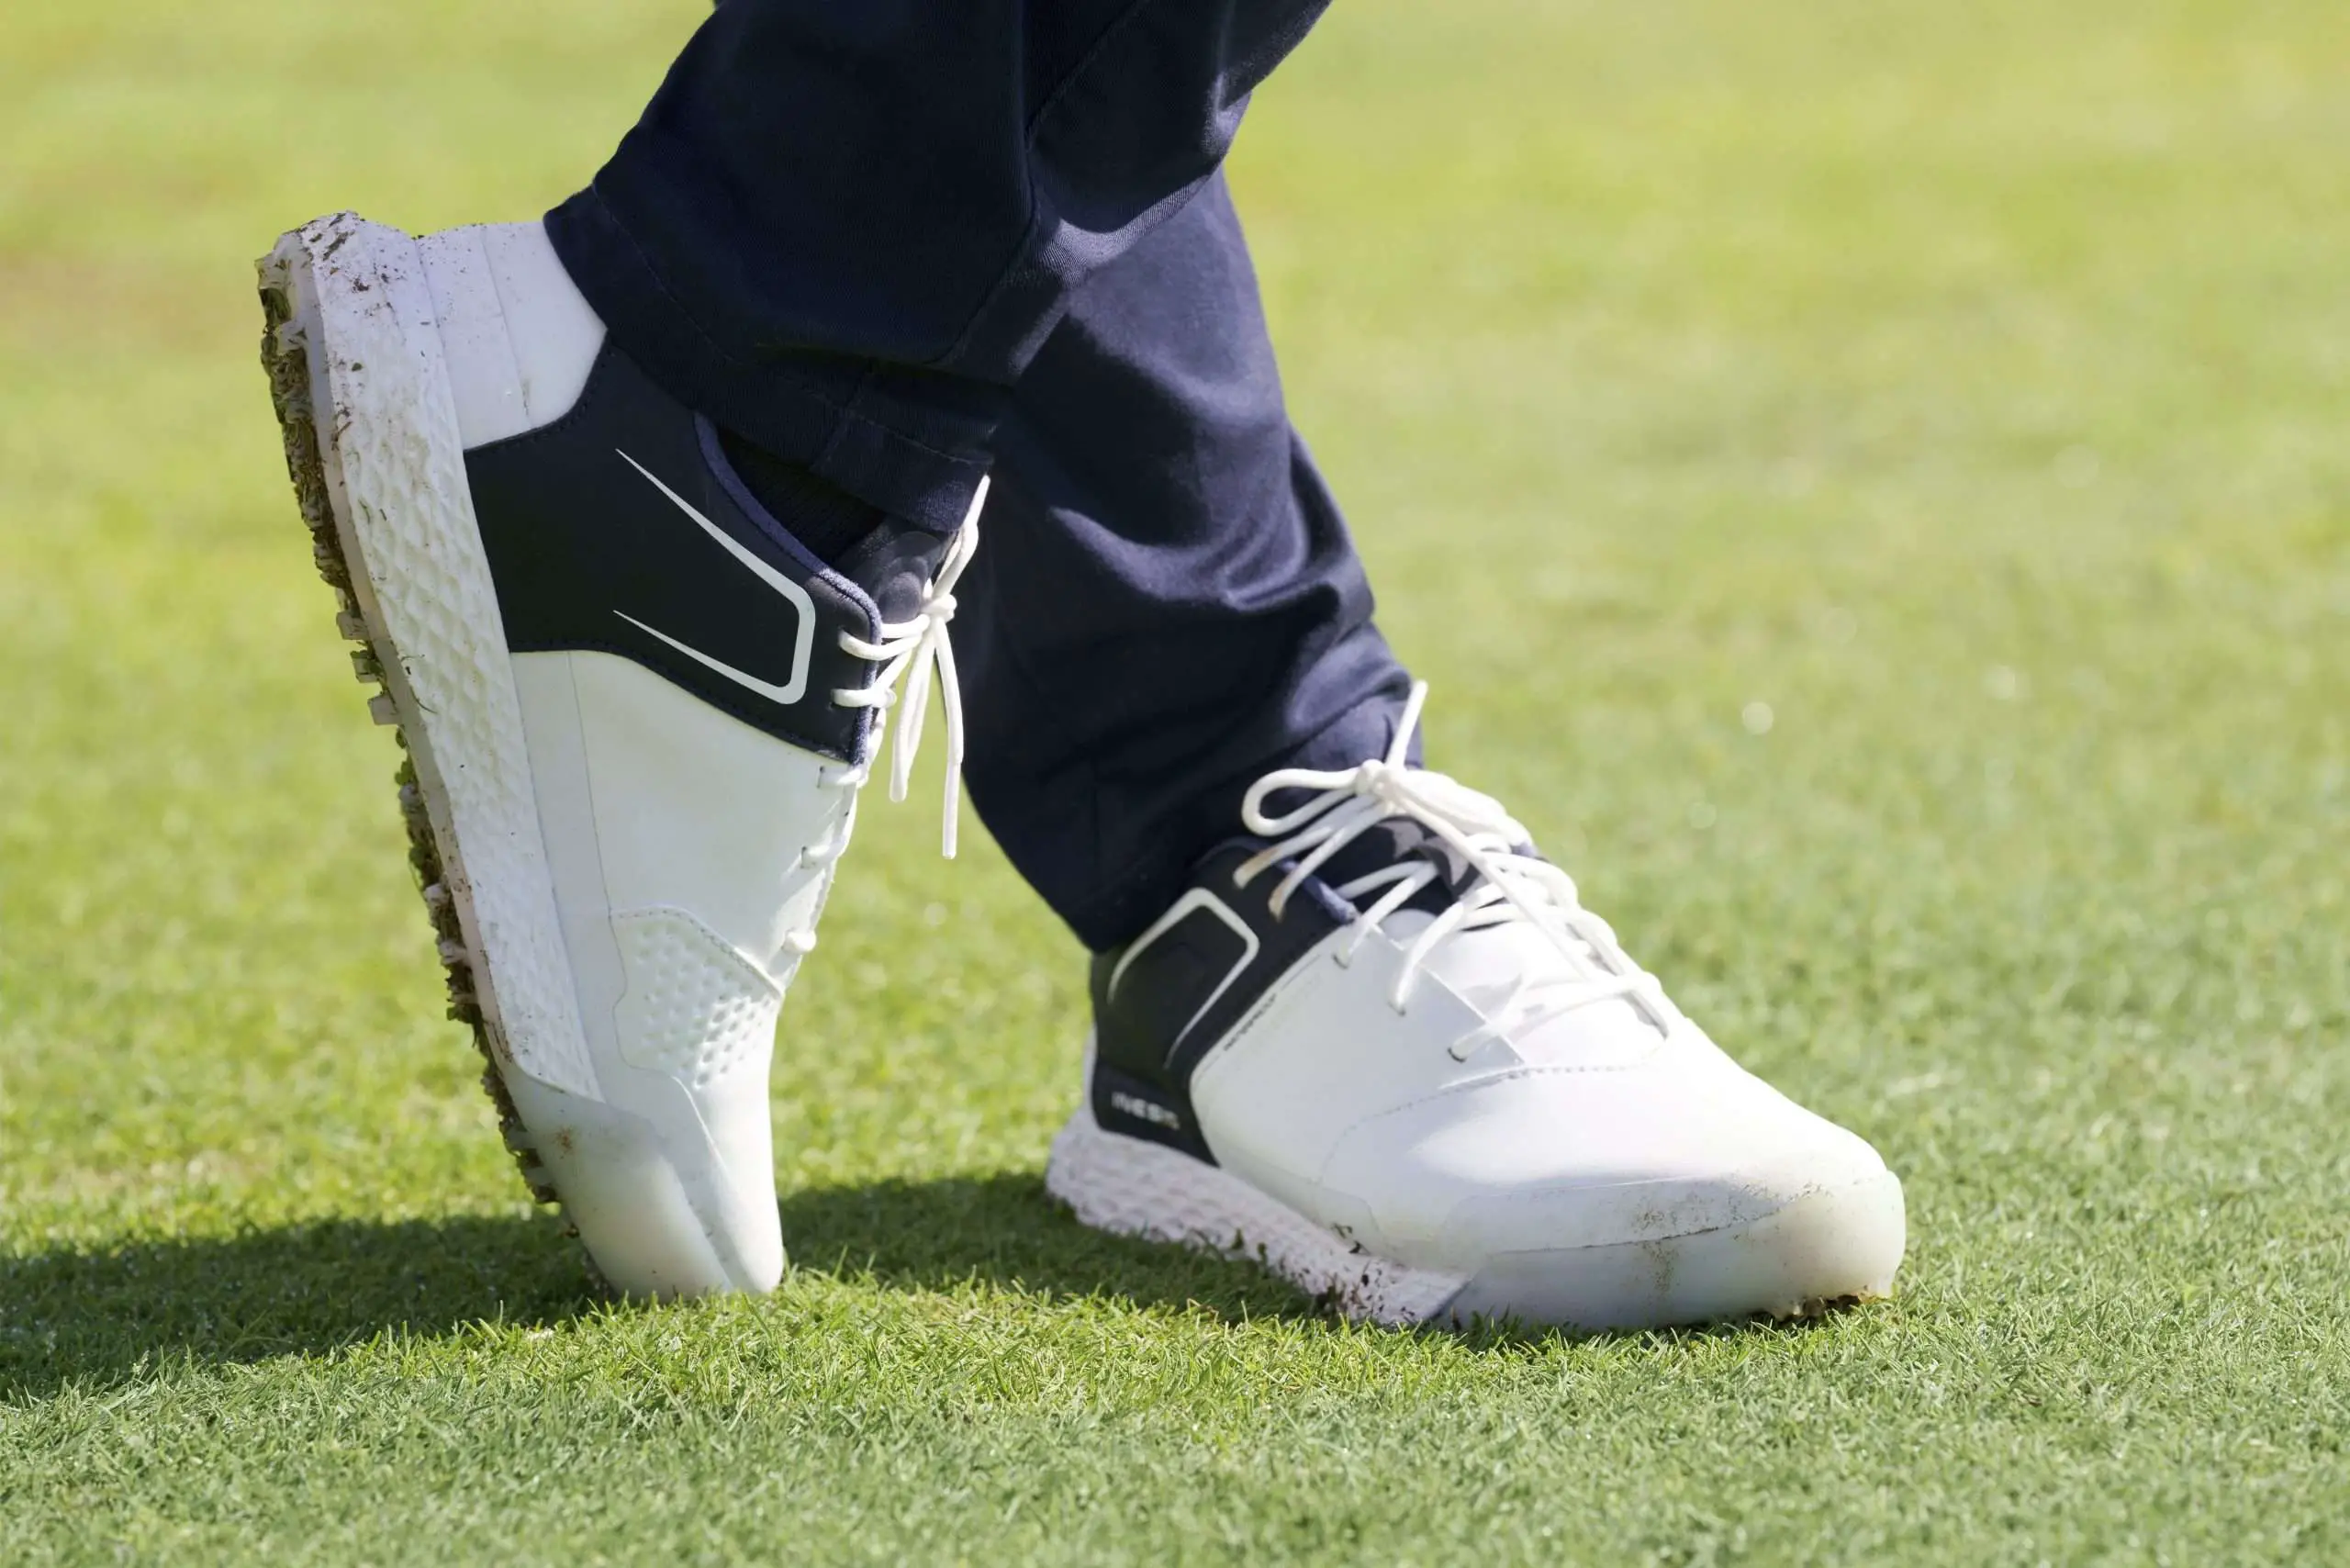 Choose The Best Golf Shoes For You